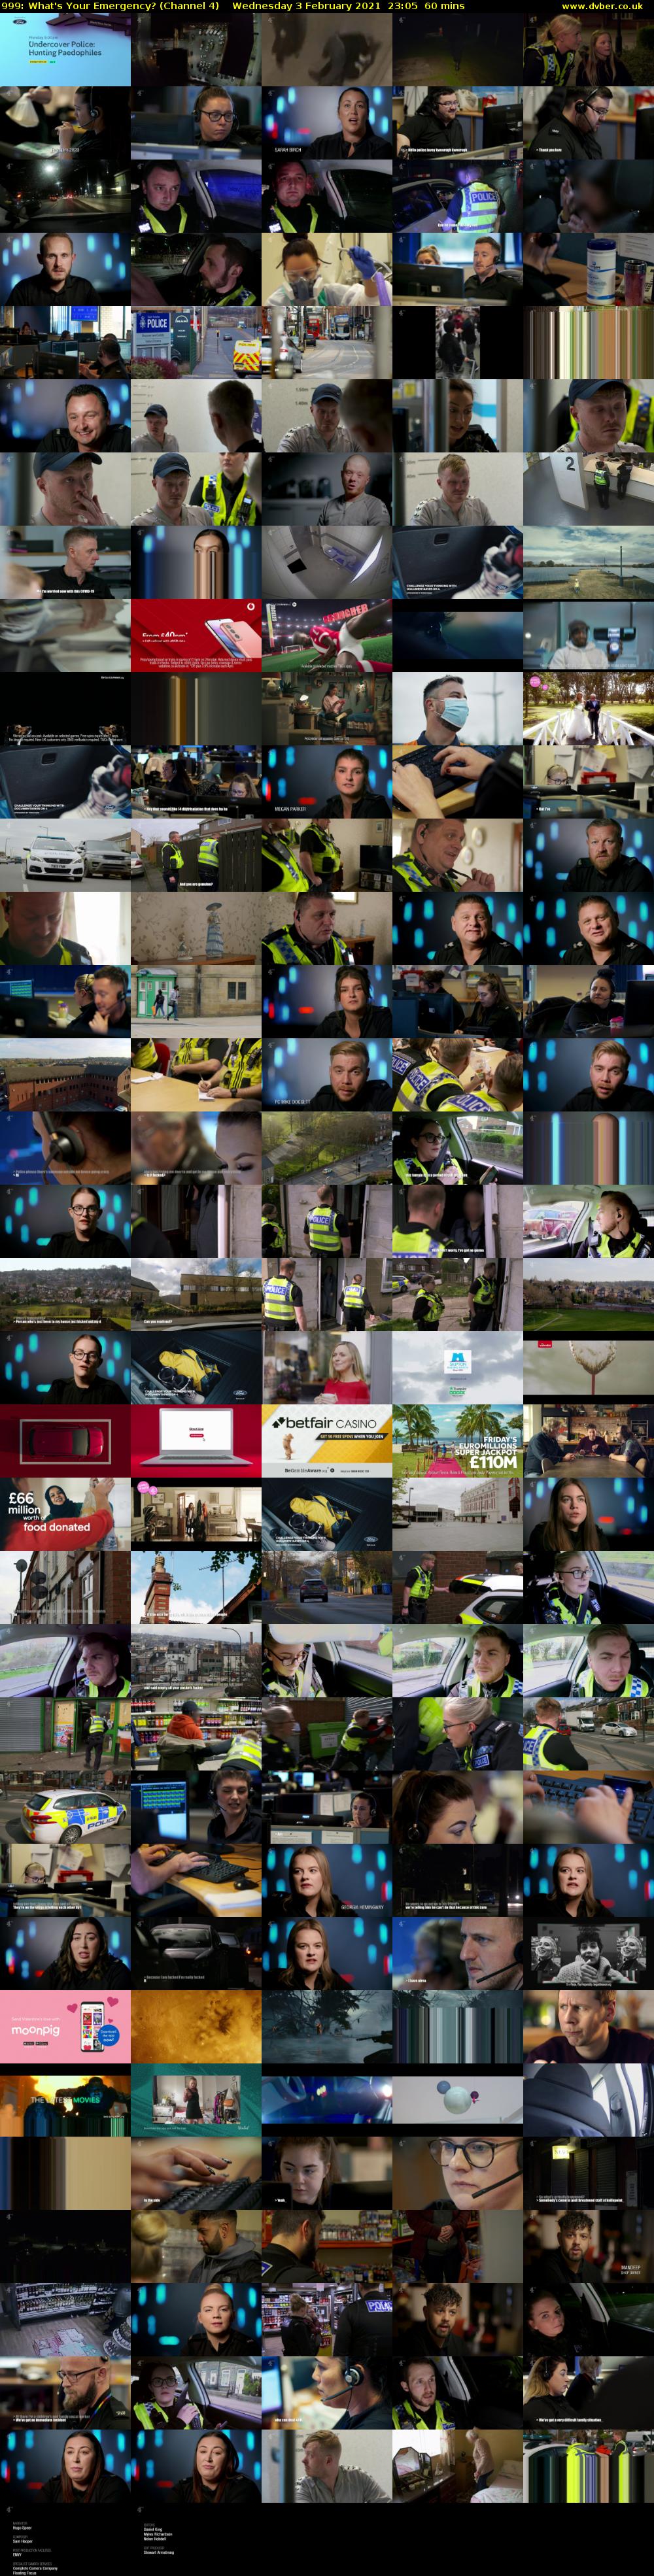 999: What's Your Emergency? (Channel 4) Wednesday 3 February 2021 23:05 - 00:05